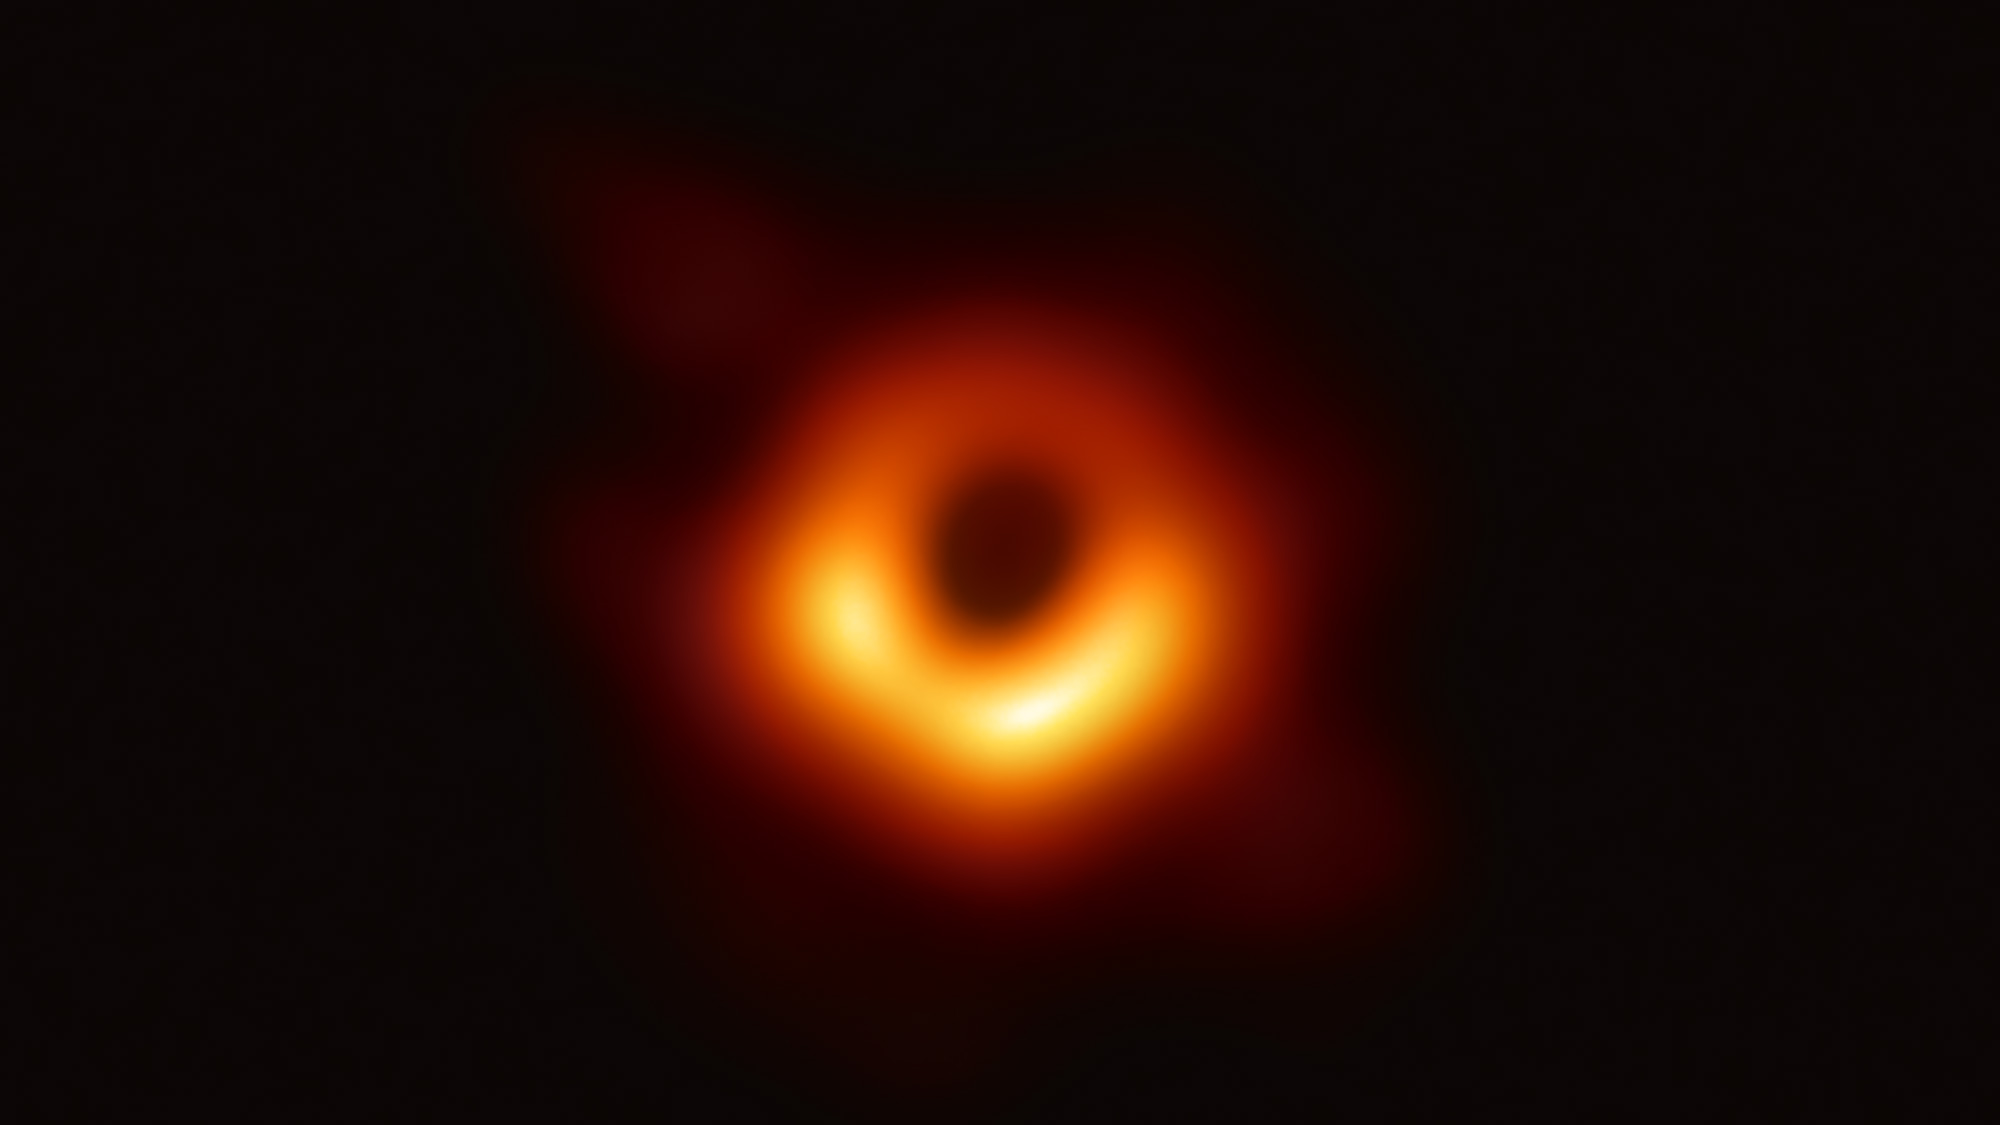 The Event Horizon Telescope, a planet-scale array of eight ground-based radio telescopes forged through international collaboration, captured this image of the supermassive black hole and its shadow that's in the center of the galaxy M87.